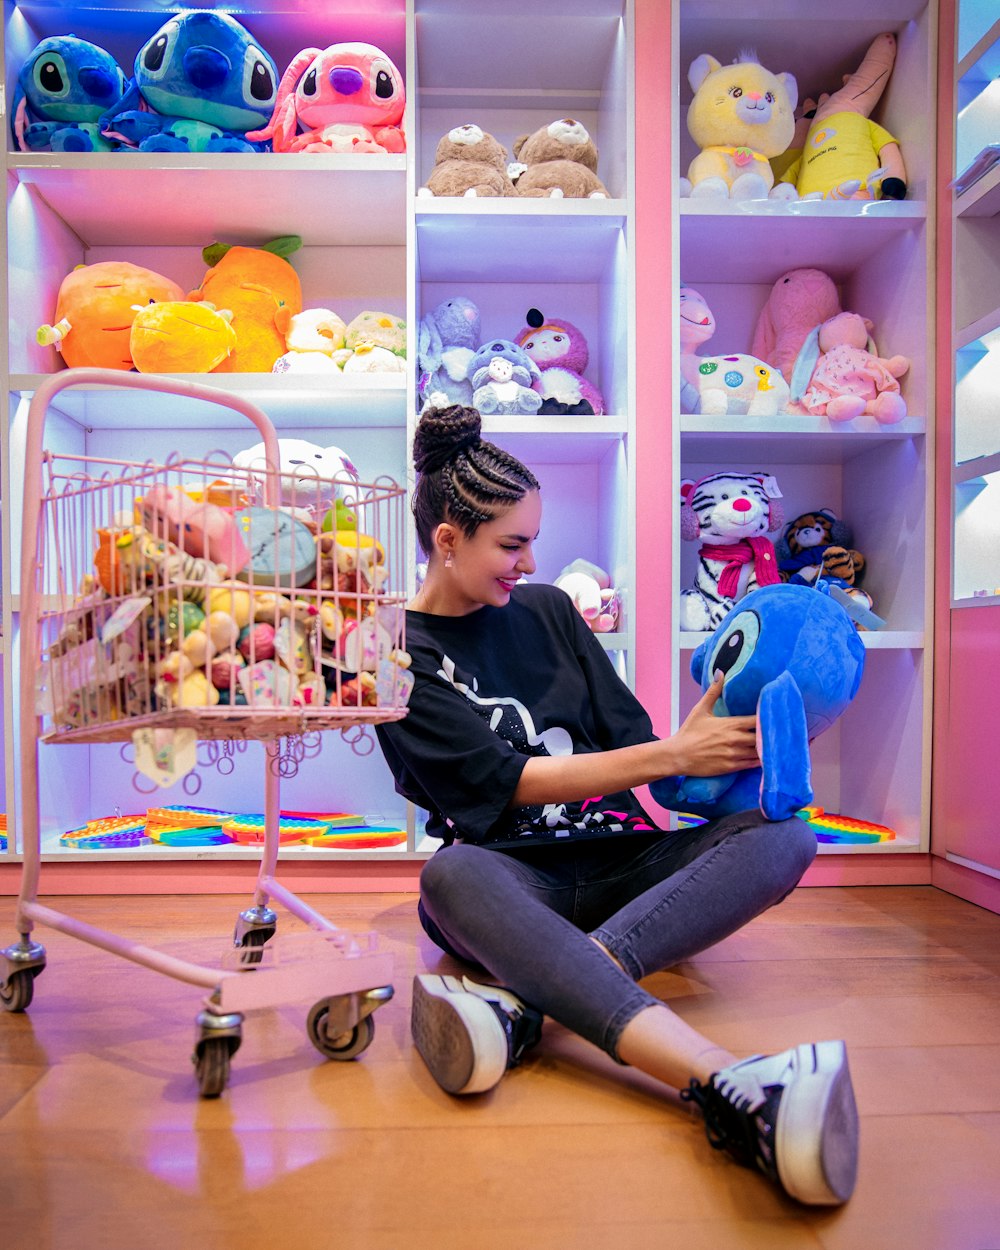 a woman sitting on the floor with a stuffed animal